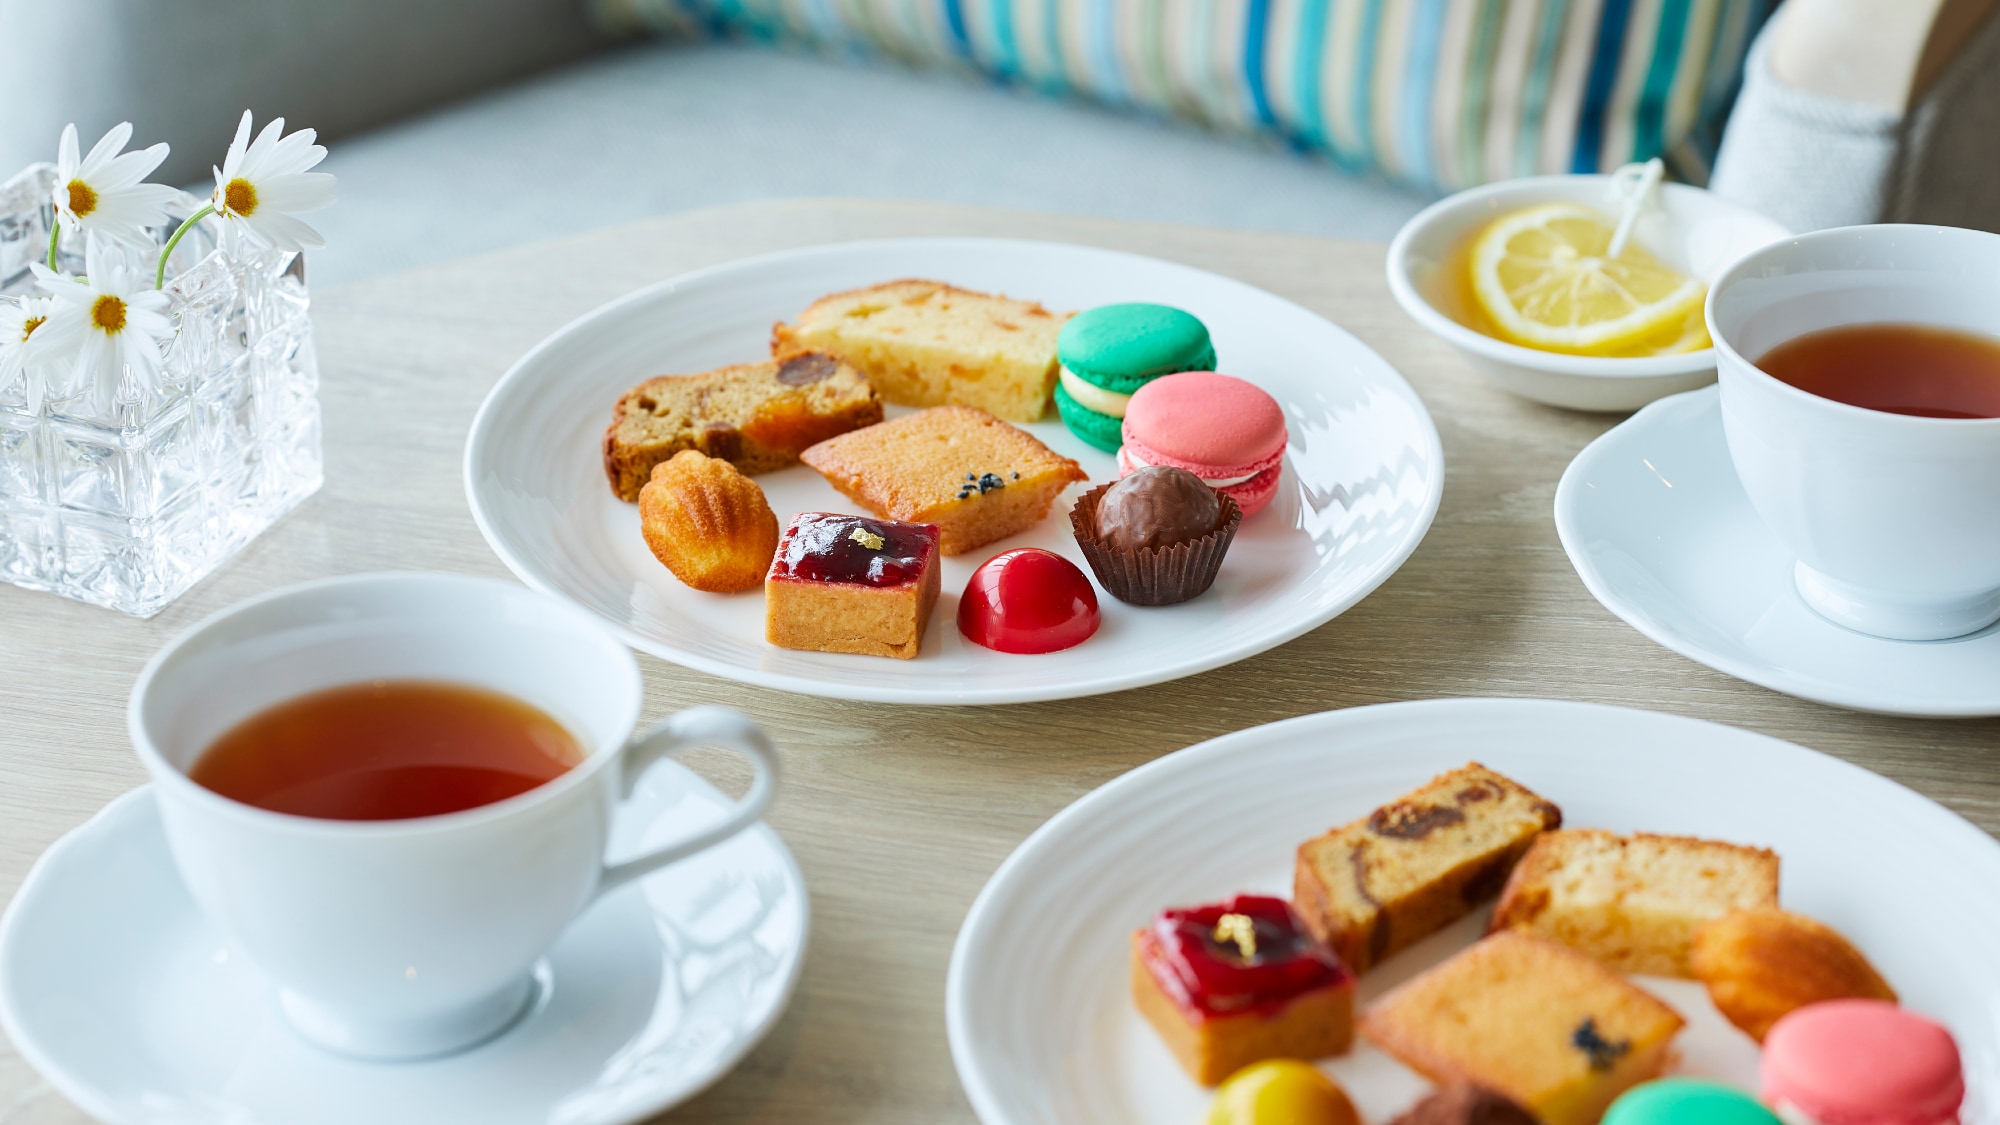 〇 "Nikko Lounge" tea time (image) exclusively for Nikko Floor guests